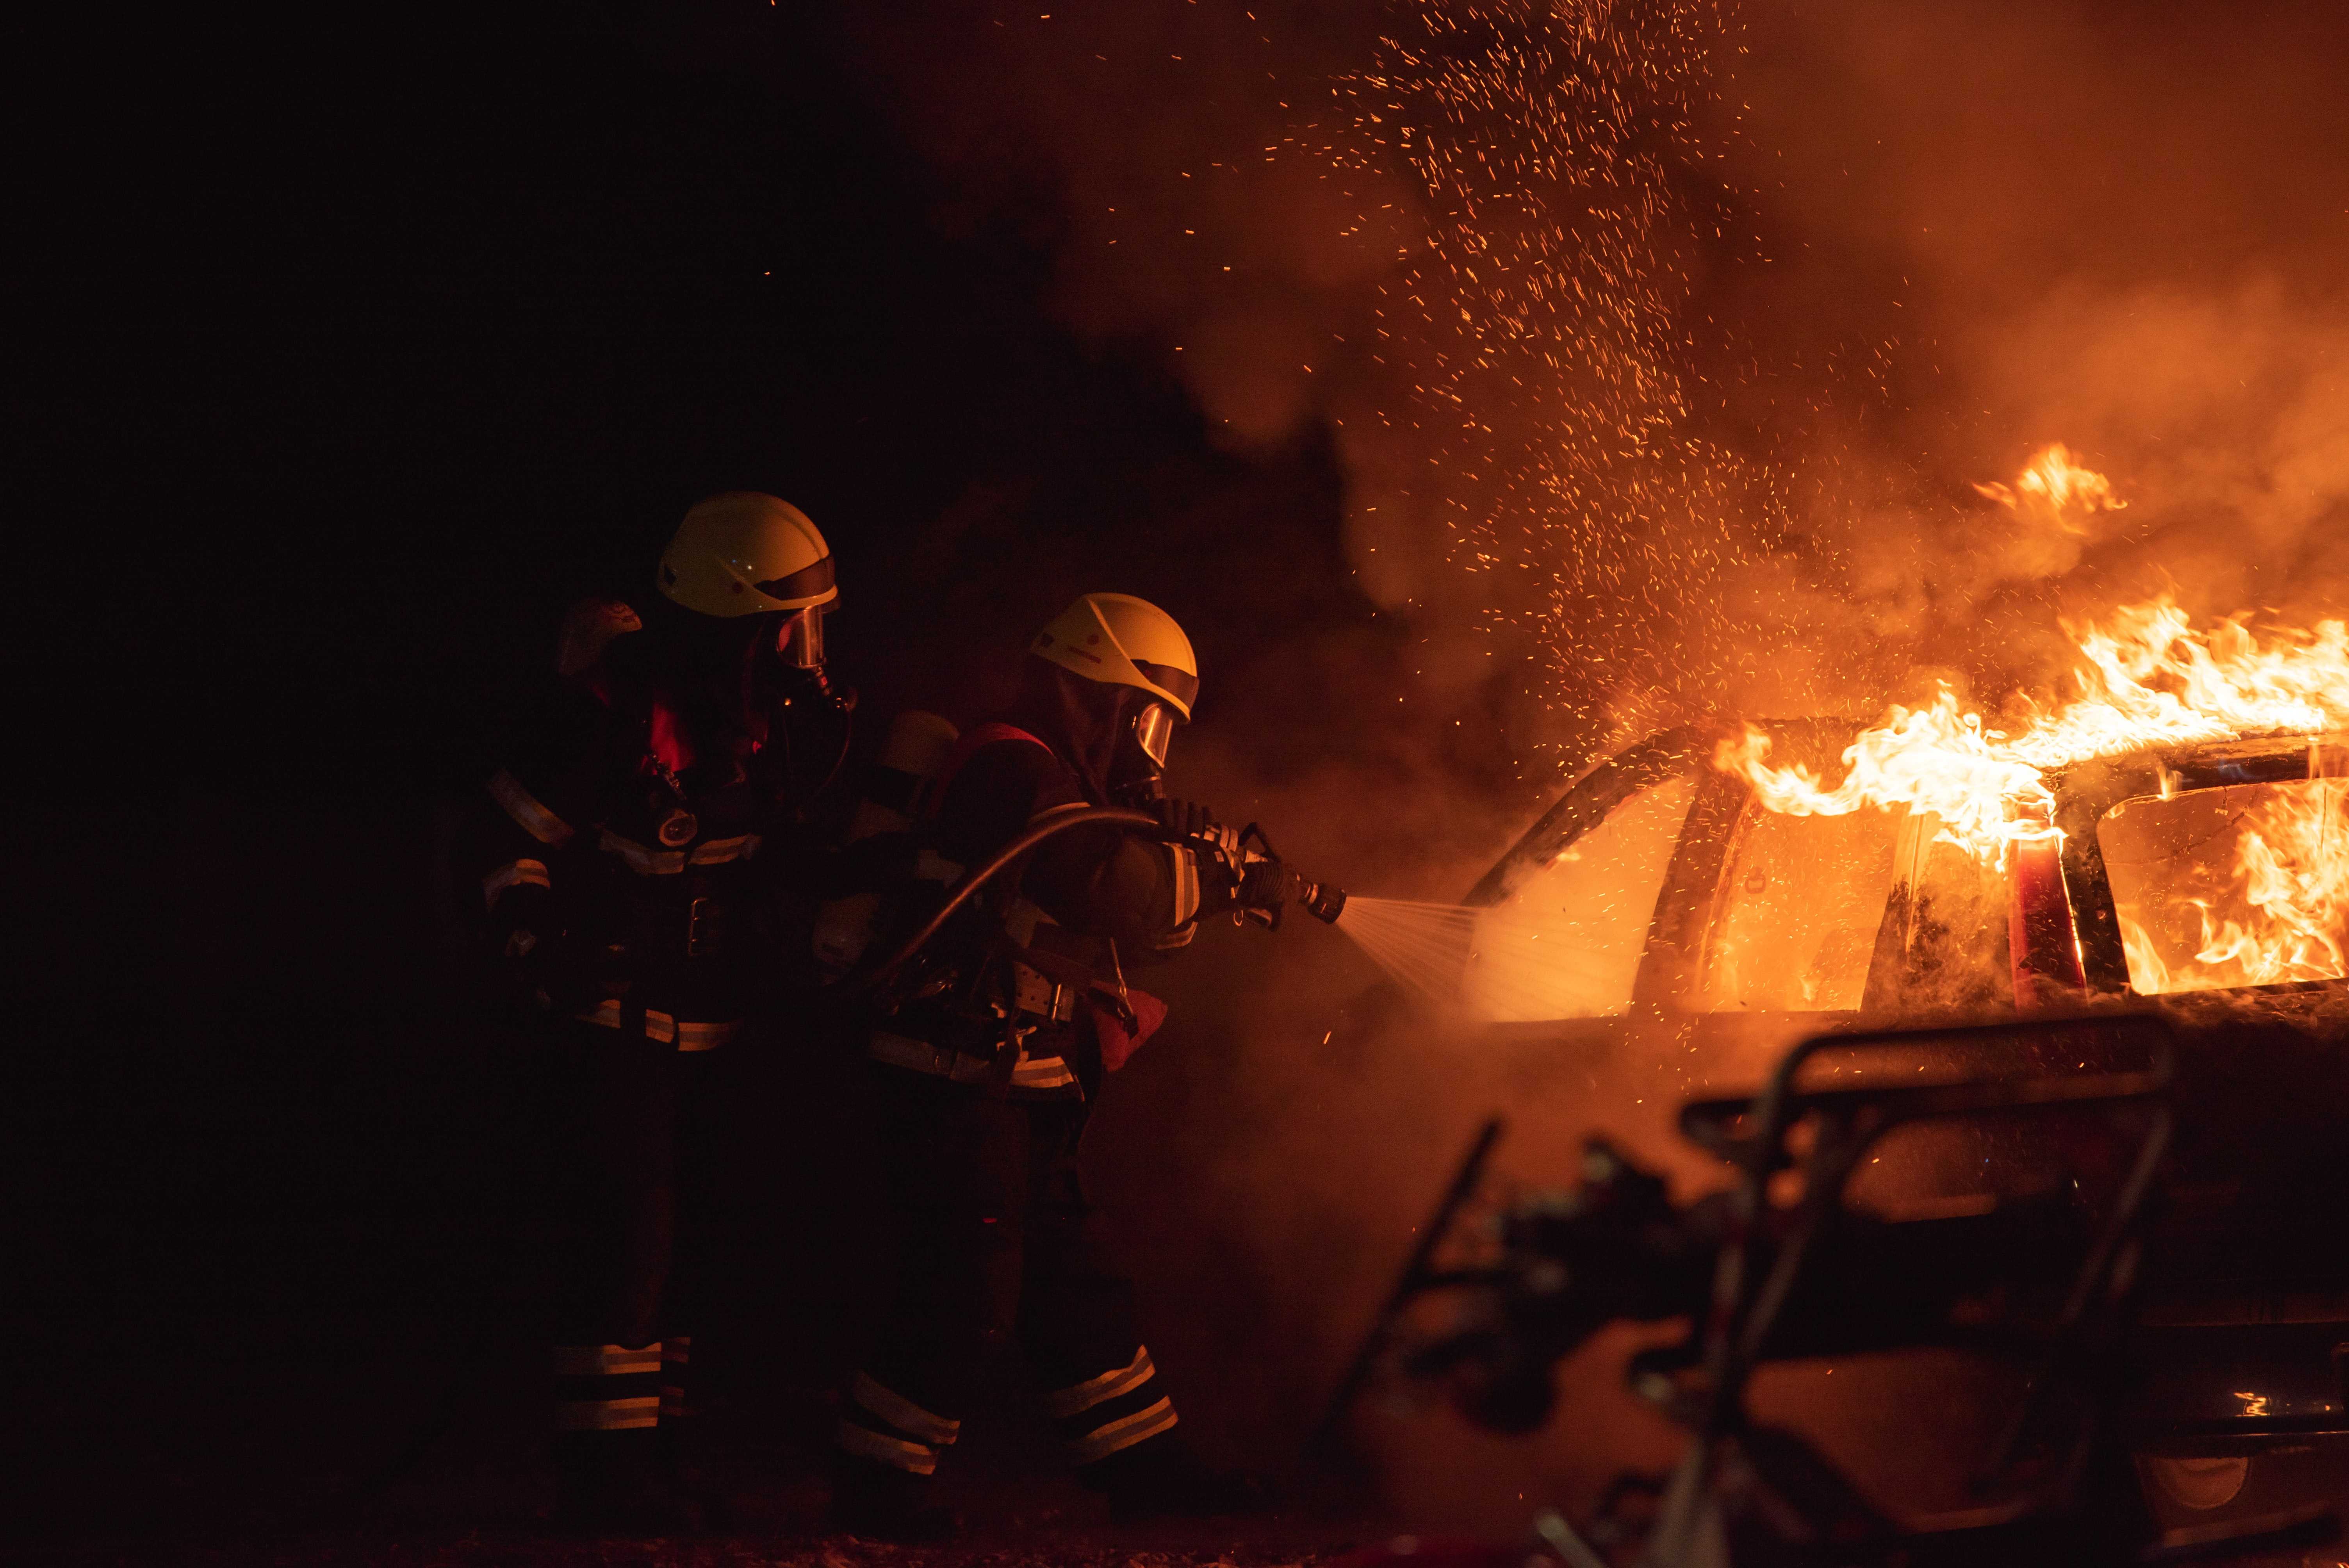 Two firefighters battling a car fire